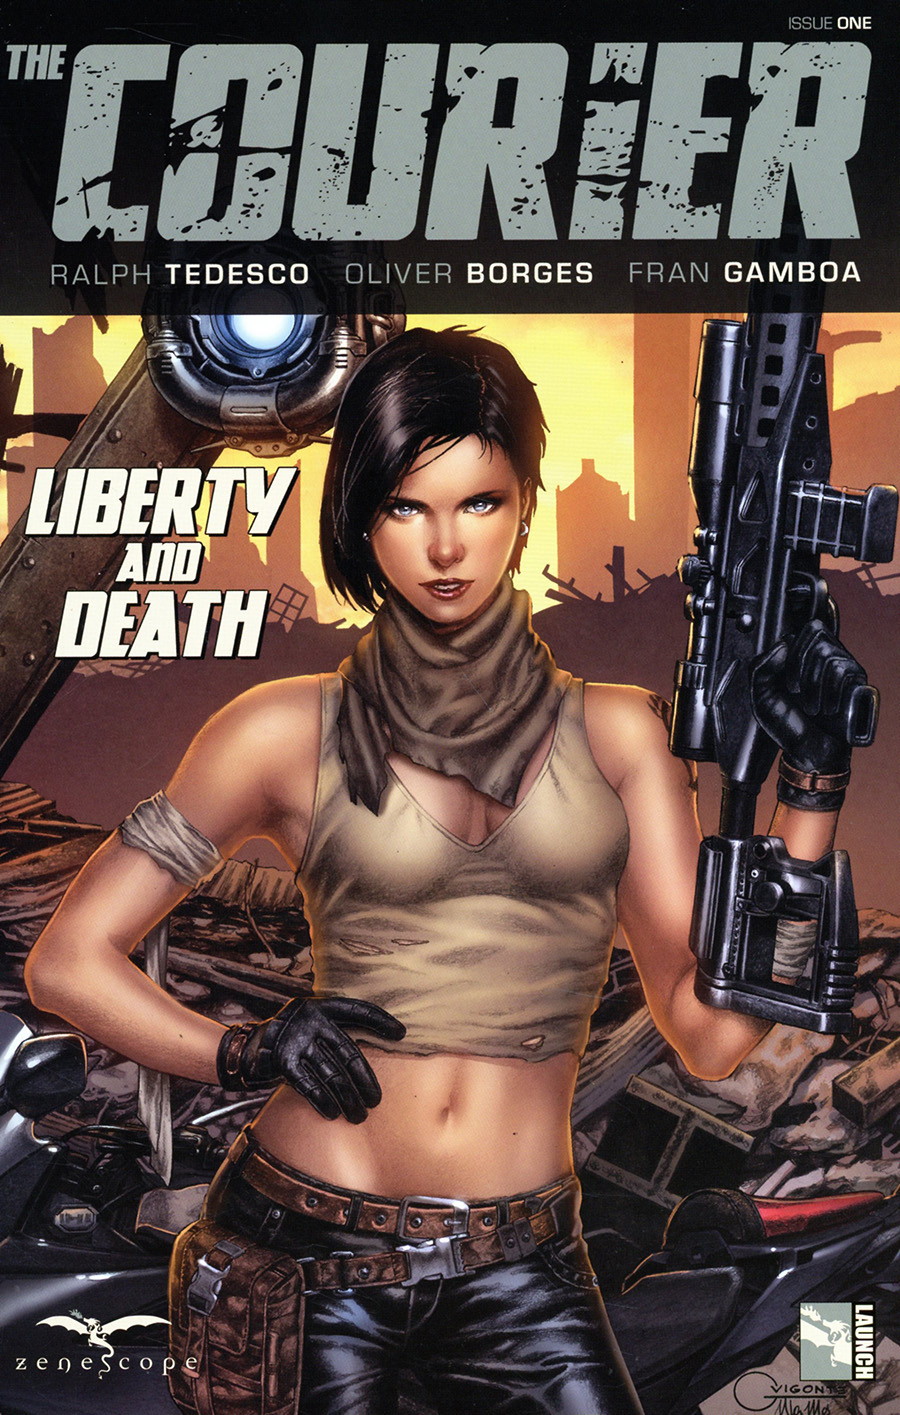 Courier Liberty And Death #1 Cover A Geebo Vigonte